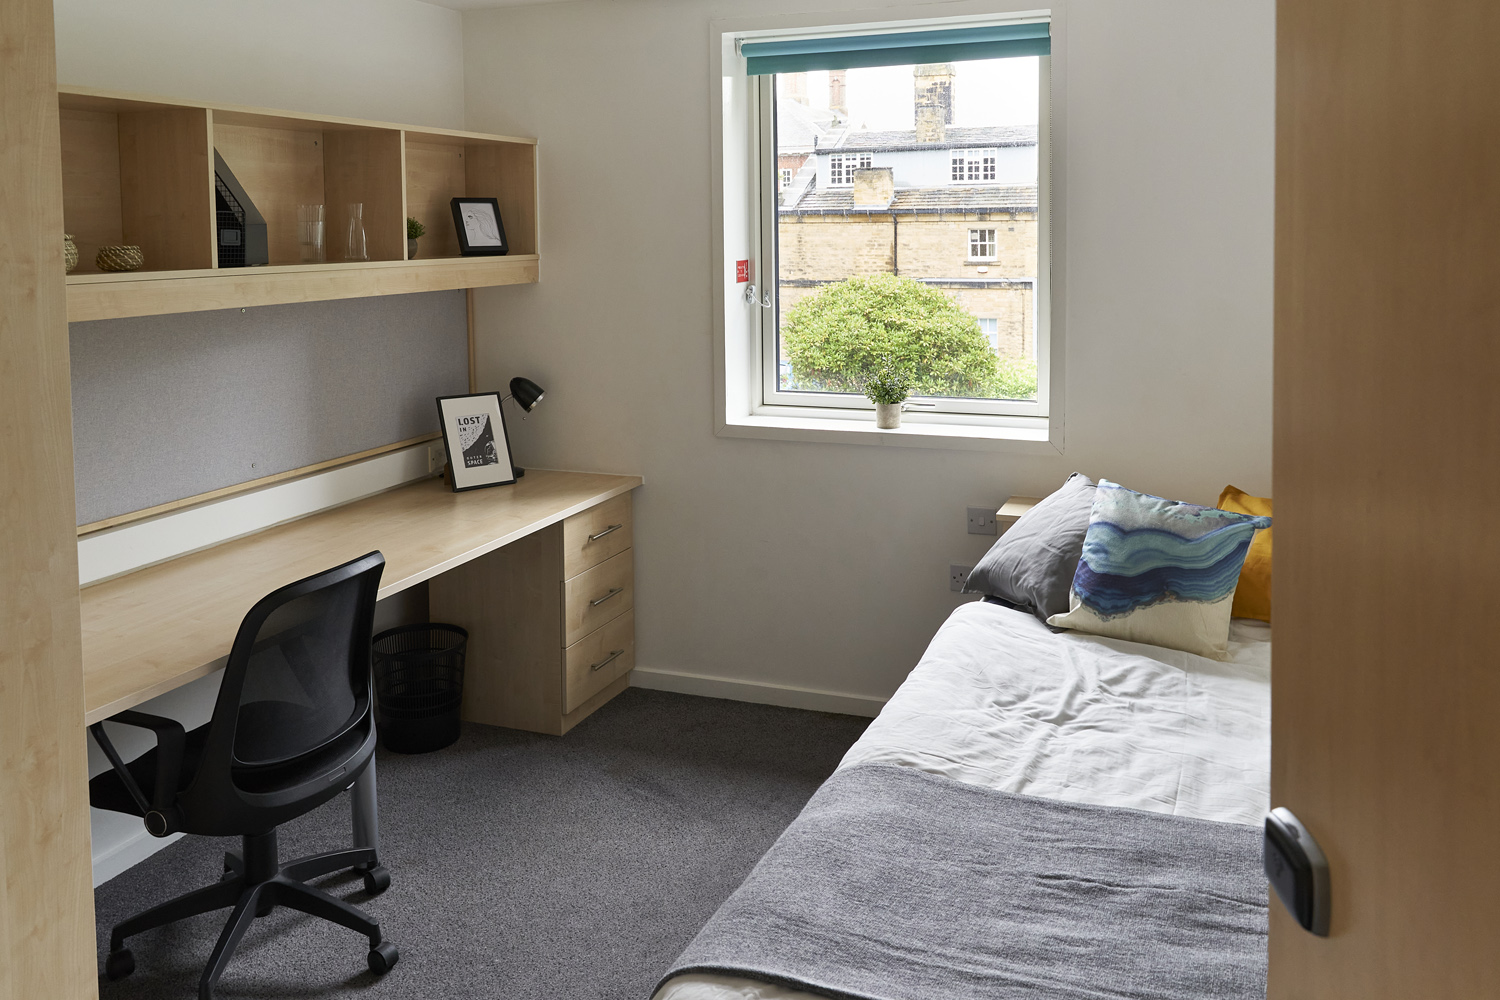 View of student room desk and bed from hallway